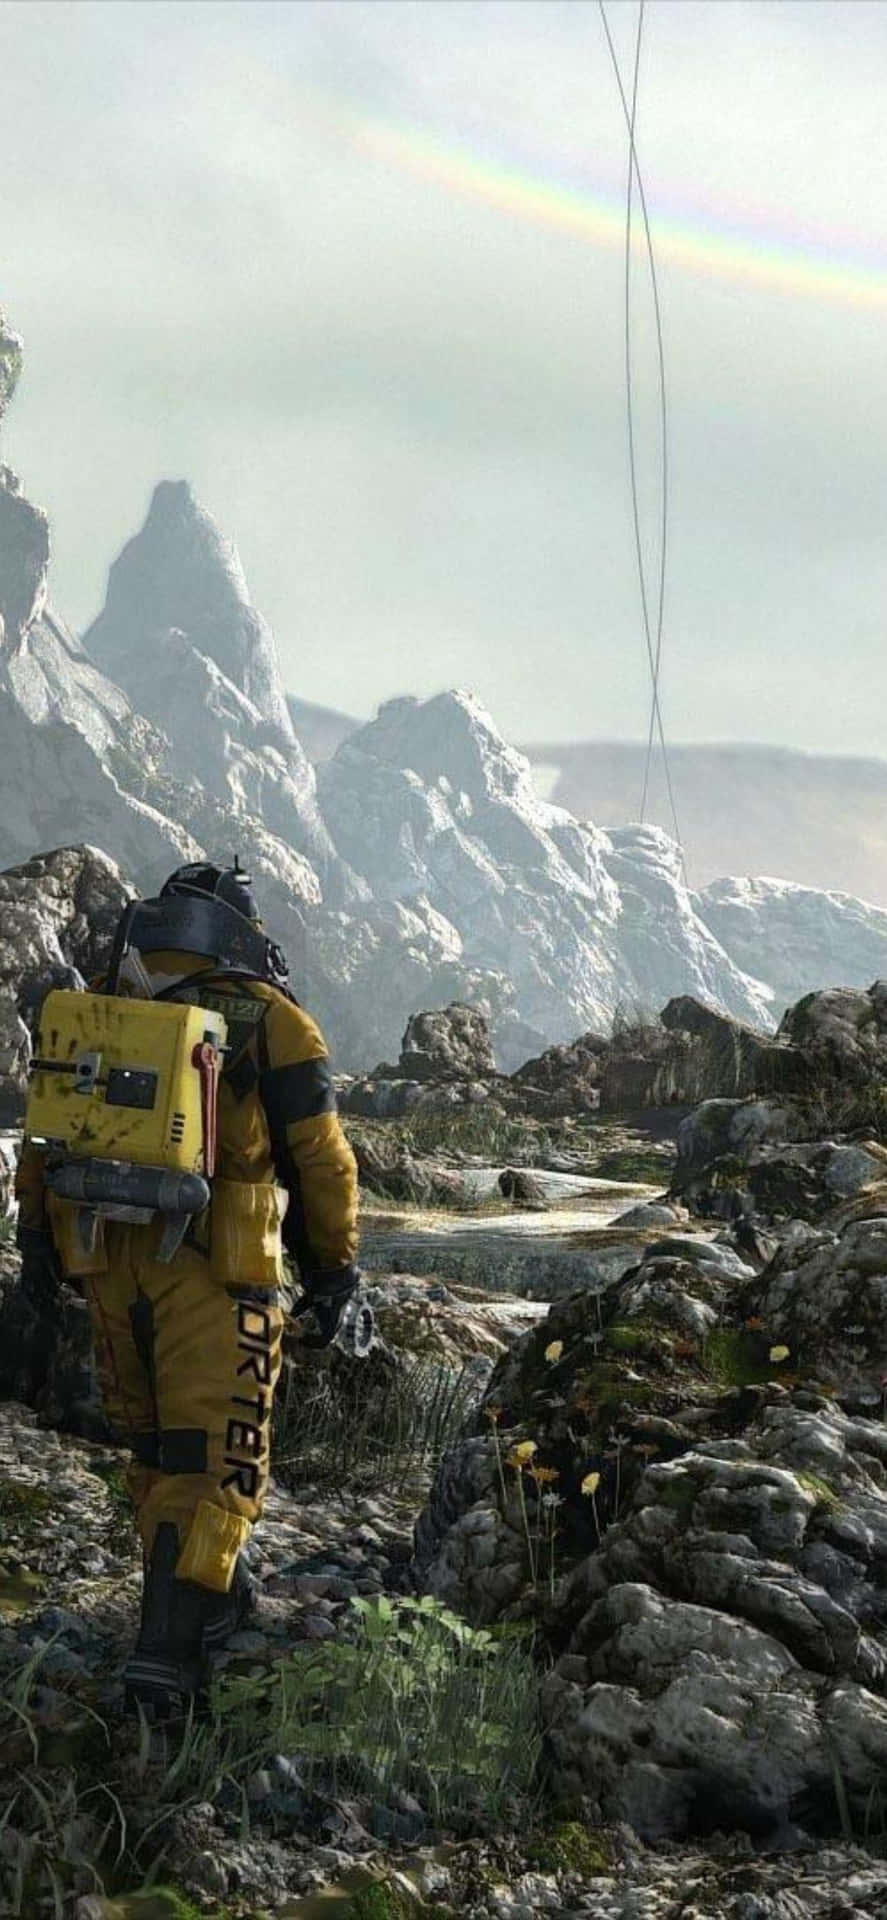 Death Stranding and the Iphone Xs Max come together for an Epic Adventure.